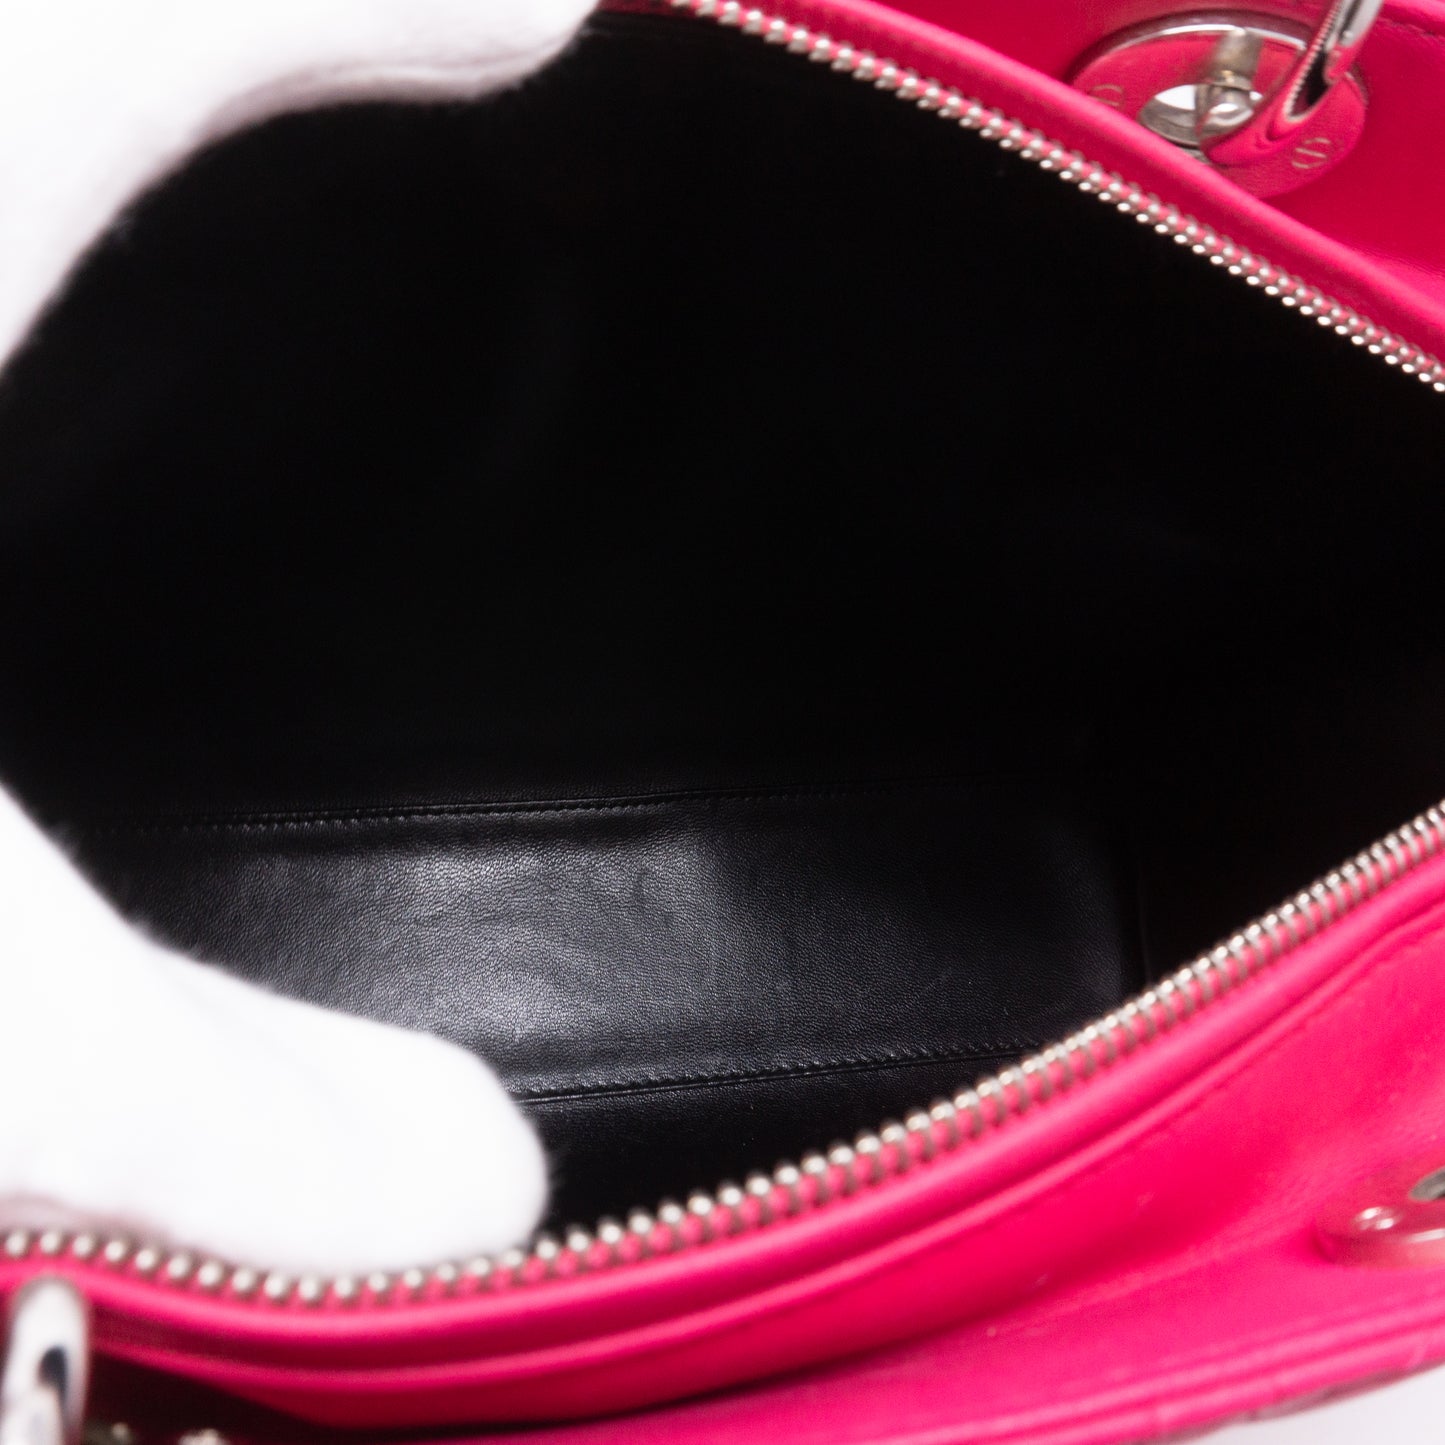 Lady Dior Large Pink Tricolor Leather